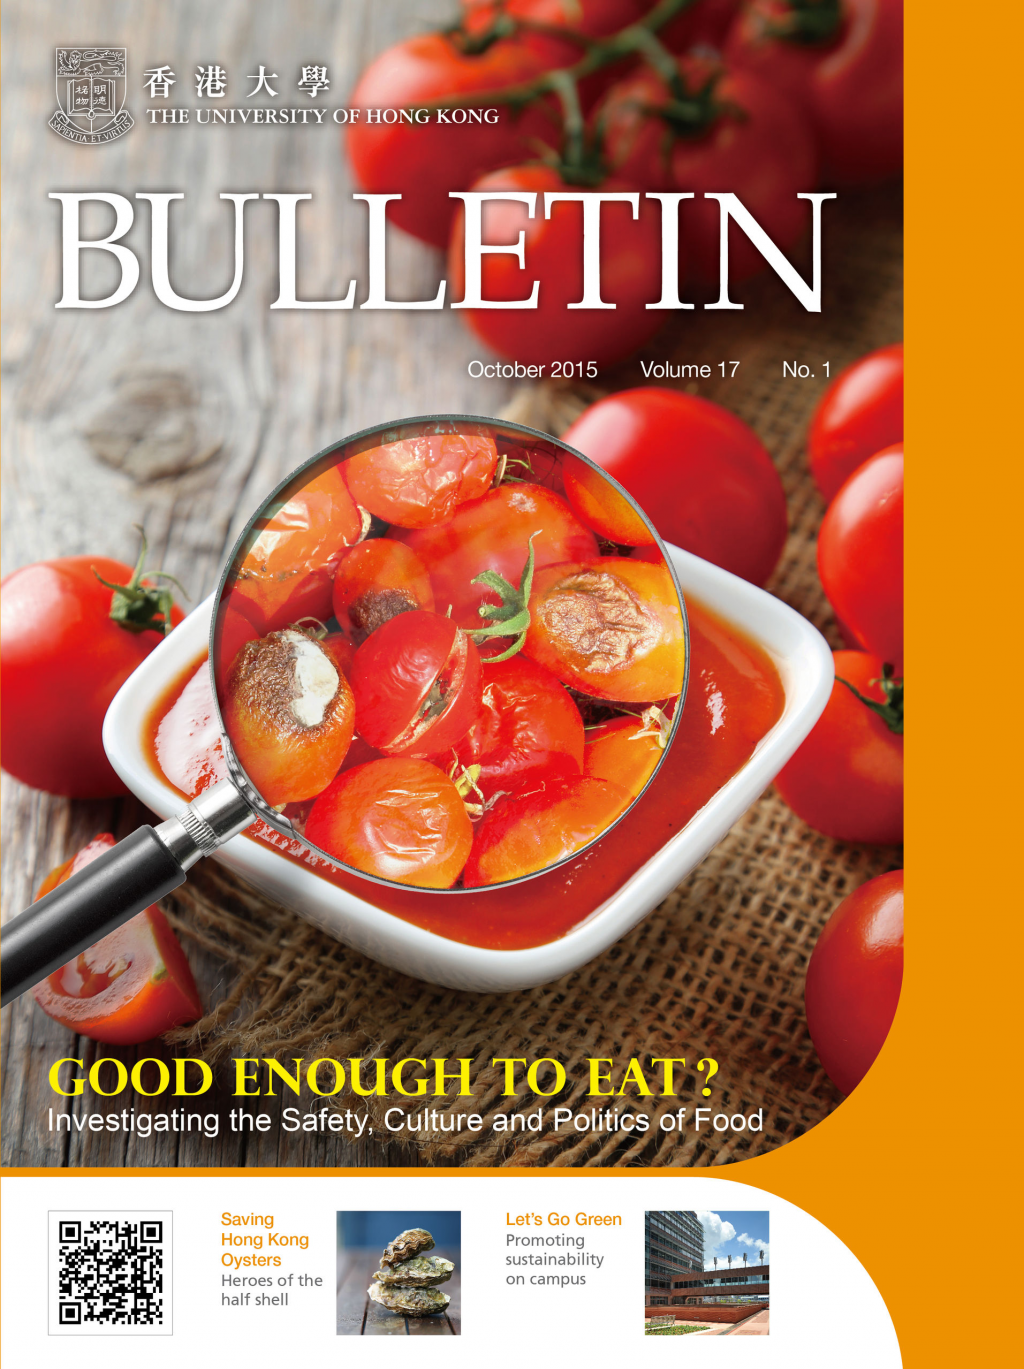 Bulletin Oct 2015 issue is out